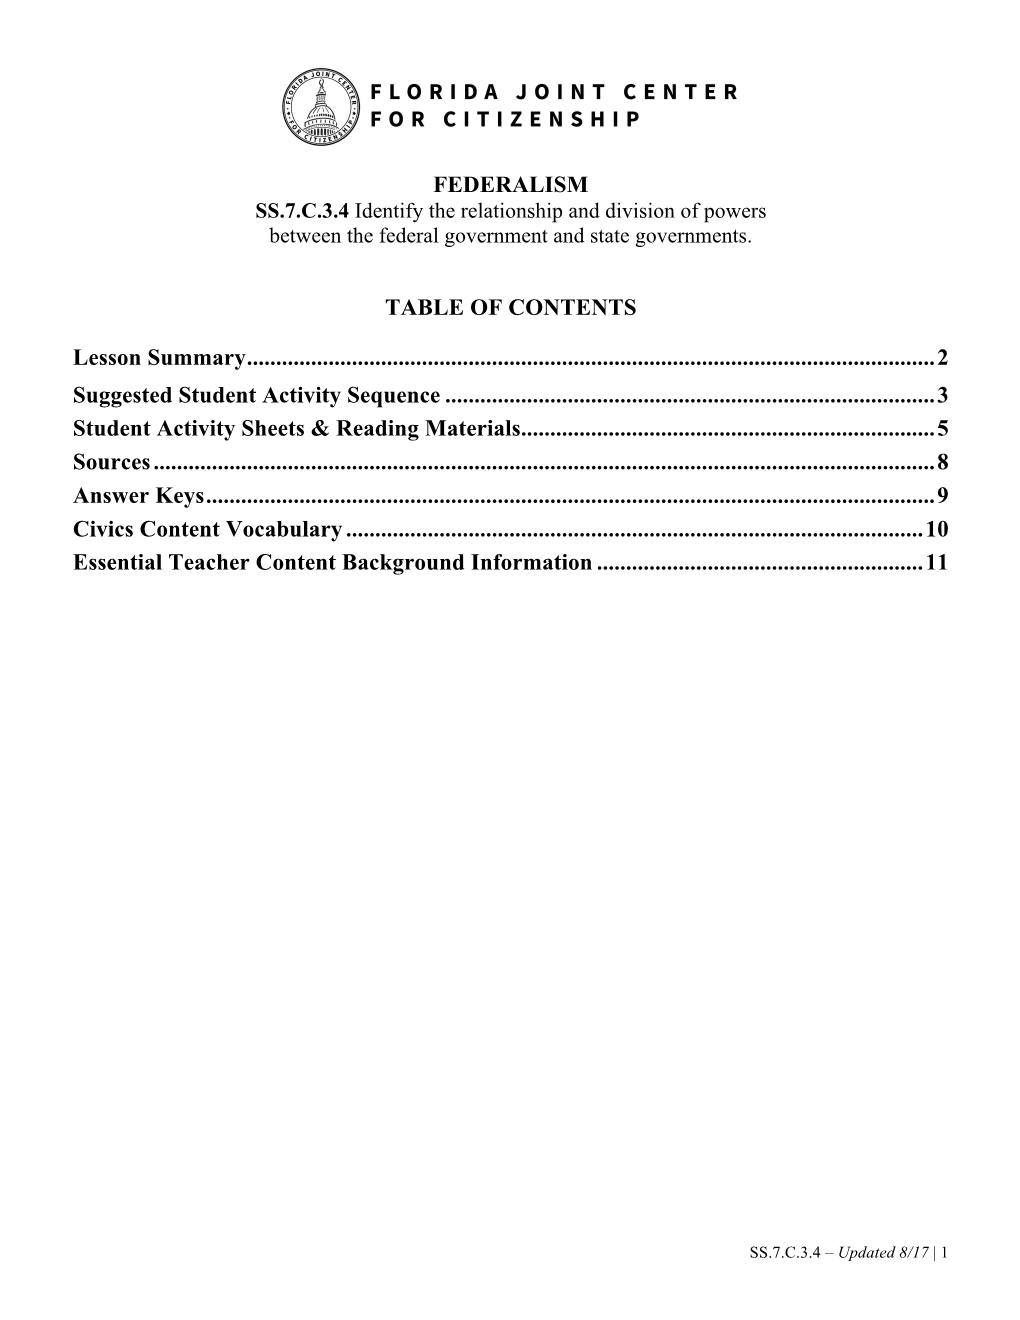 FEDERALISM TABLE of CONTENTS Lesson Summary